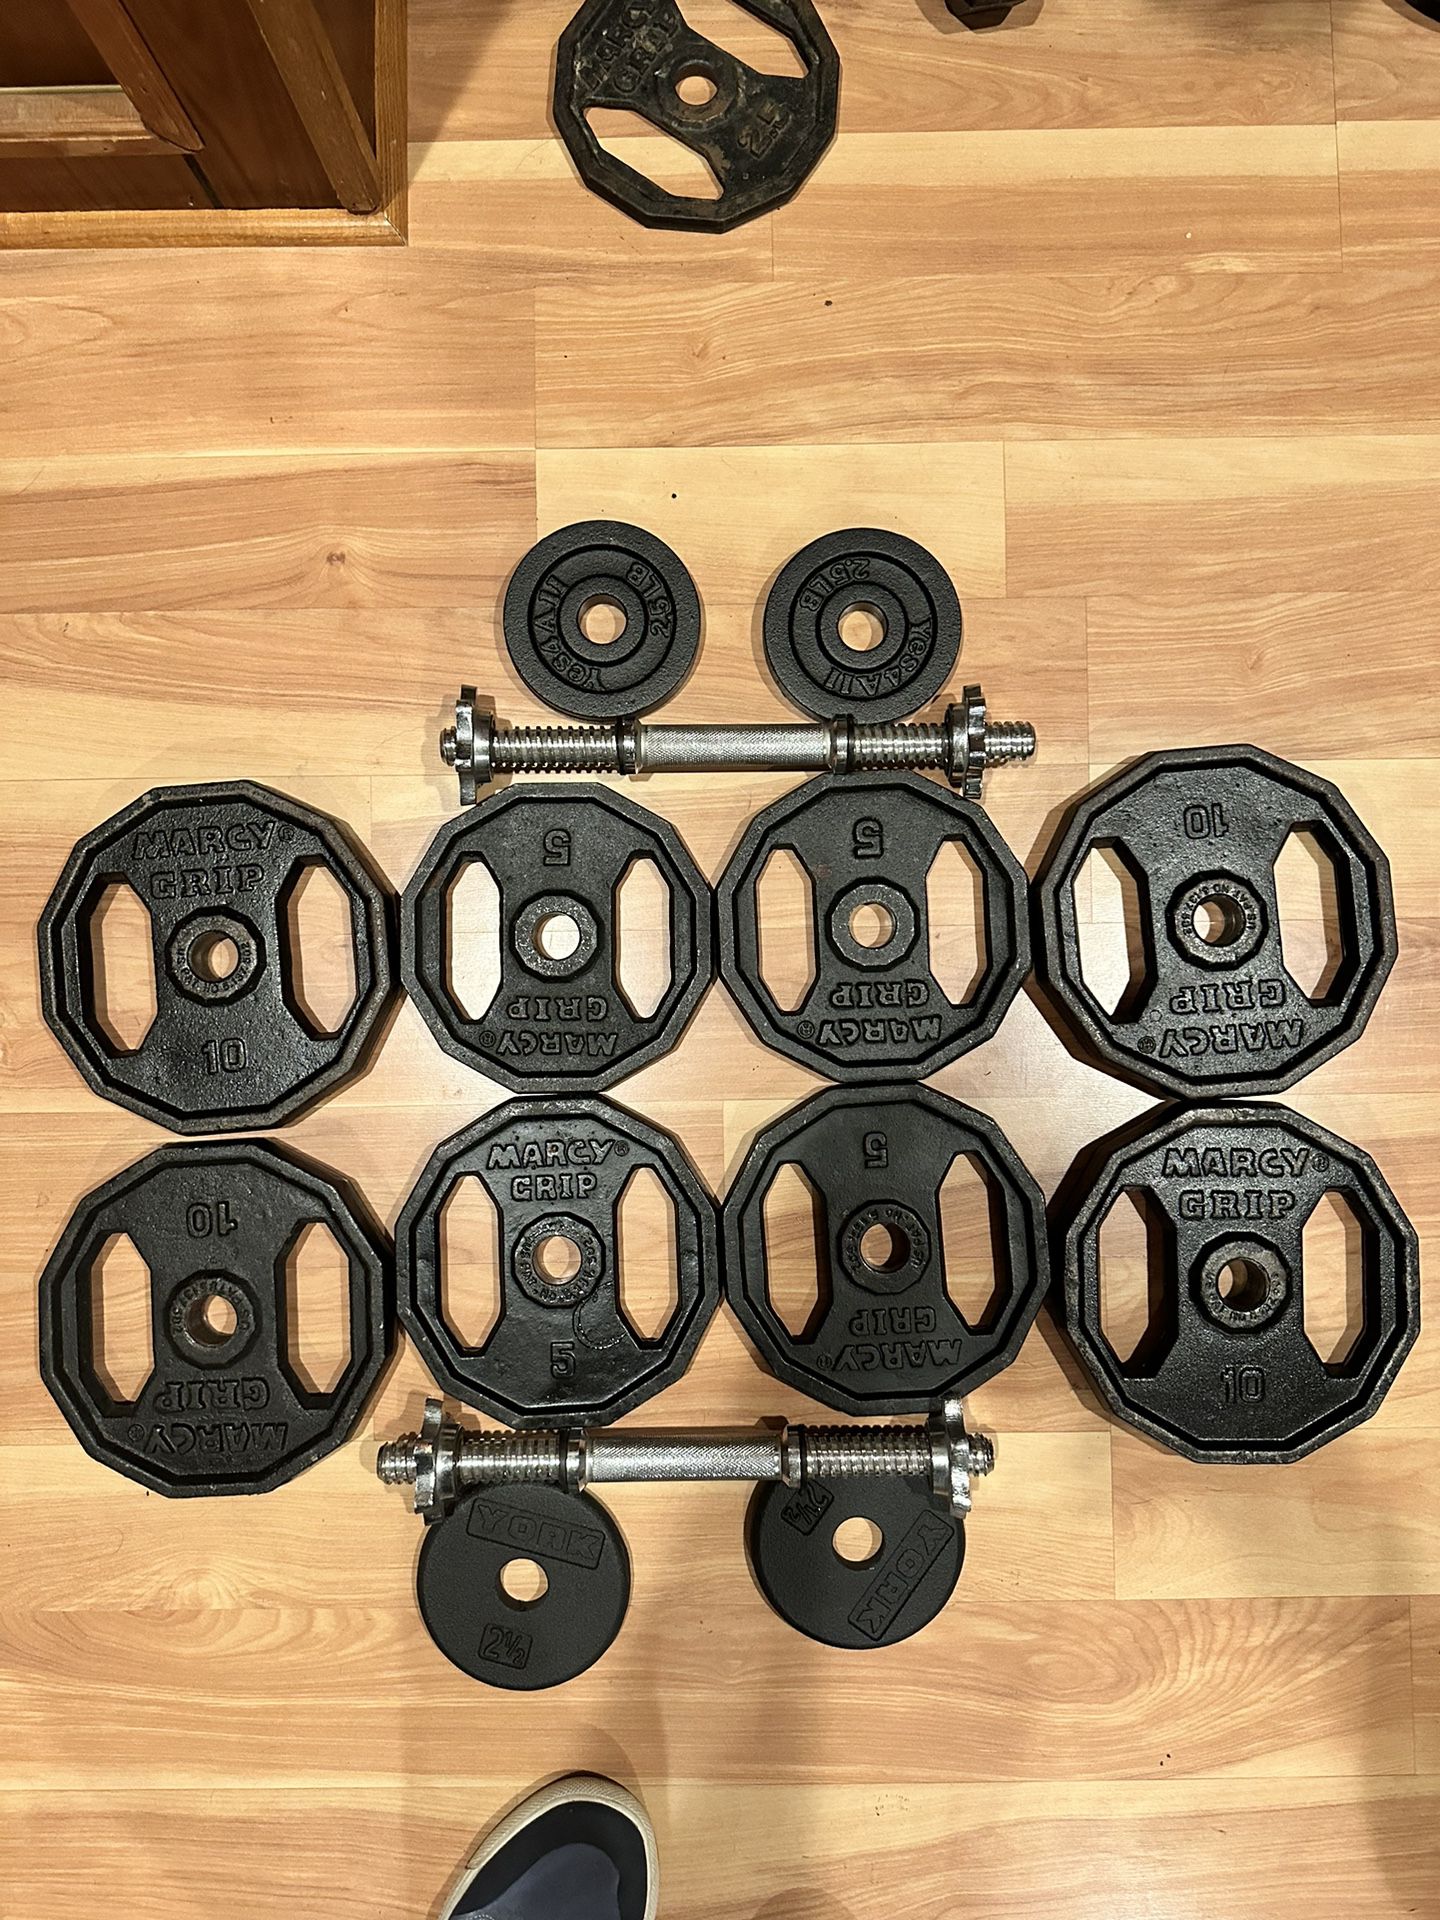 70 Pounds Of Standard Weights With Steel Handles 